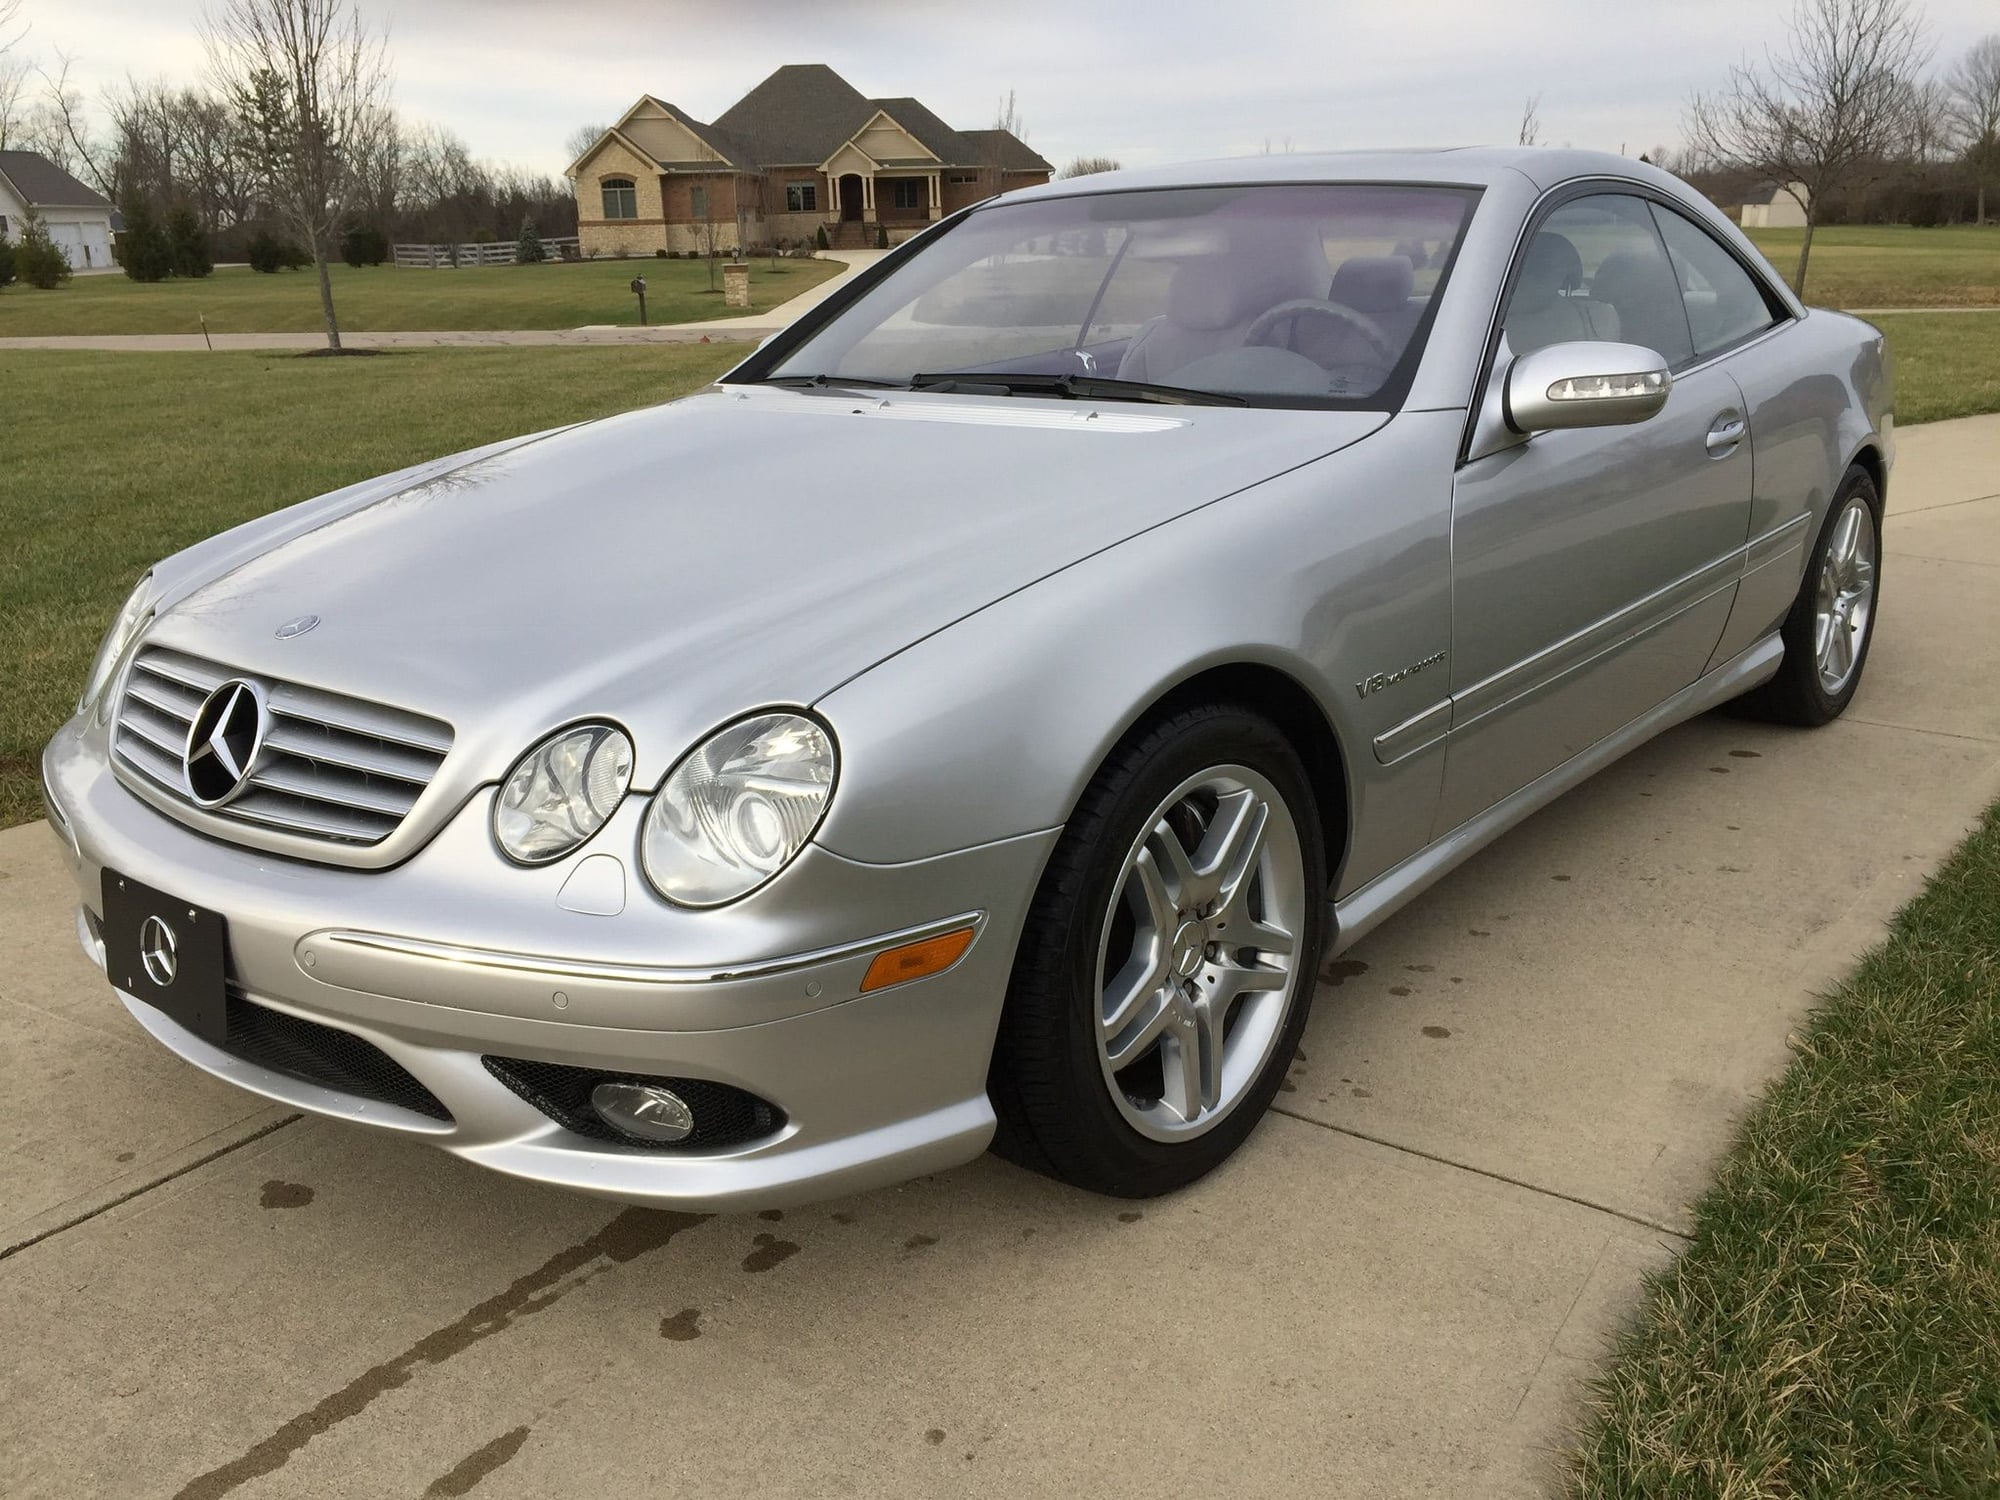 2004 Mercedes-Benz CL55 AMG - 04 AMG CL55 ONE OWNER 54K miles - Used - VIN 2G111111111111111 - 54,500 Miles - 8 cyl - 2WD - Automatic - Coupe - Gray - Waynesville, OH 45068, United States